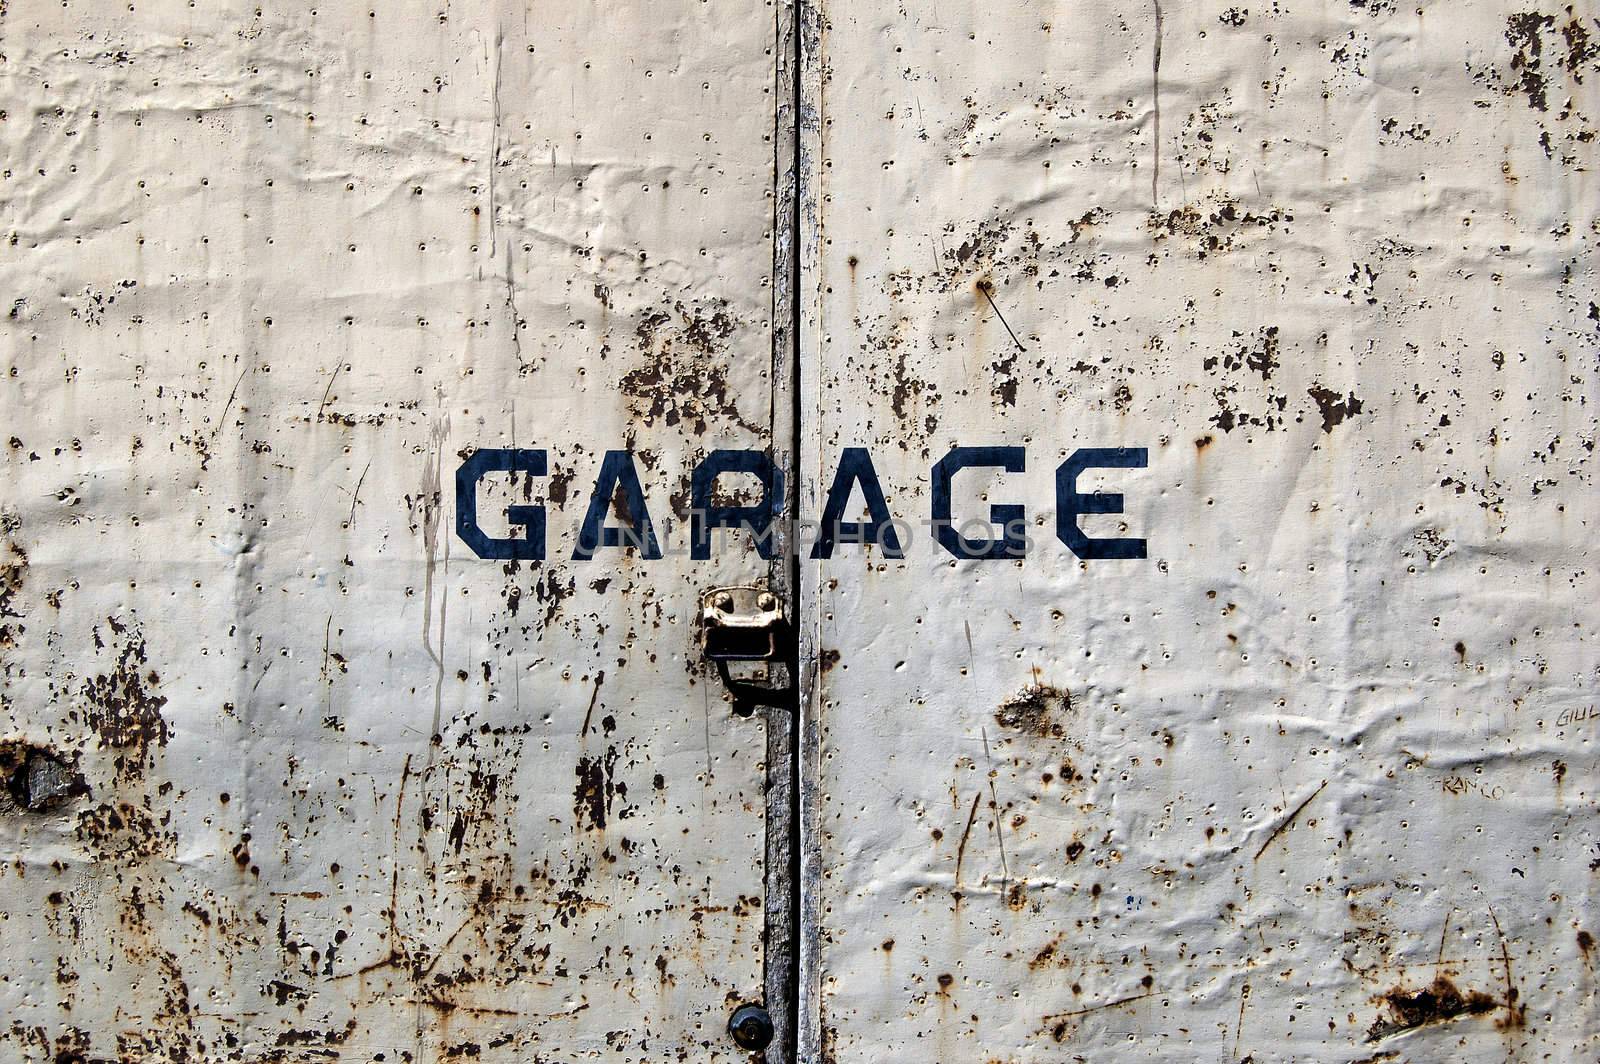 A rusted old door of a garage